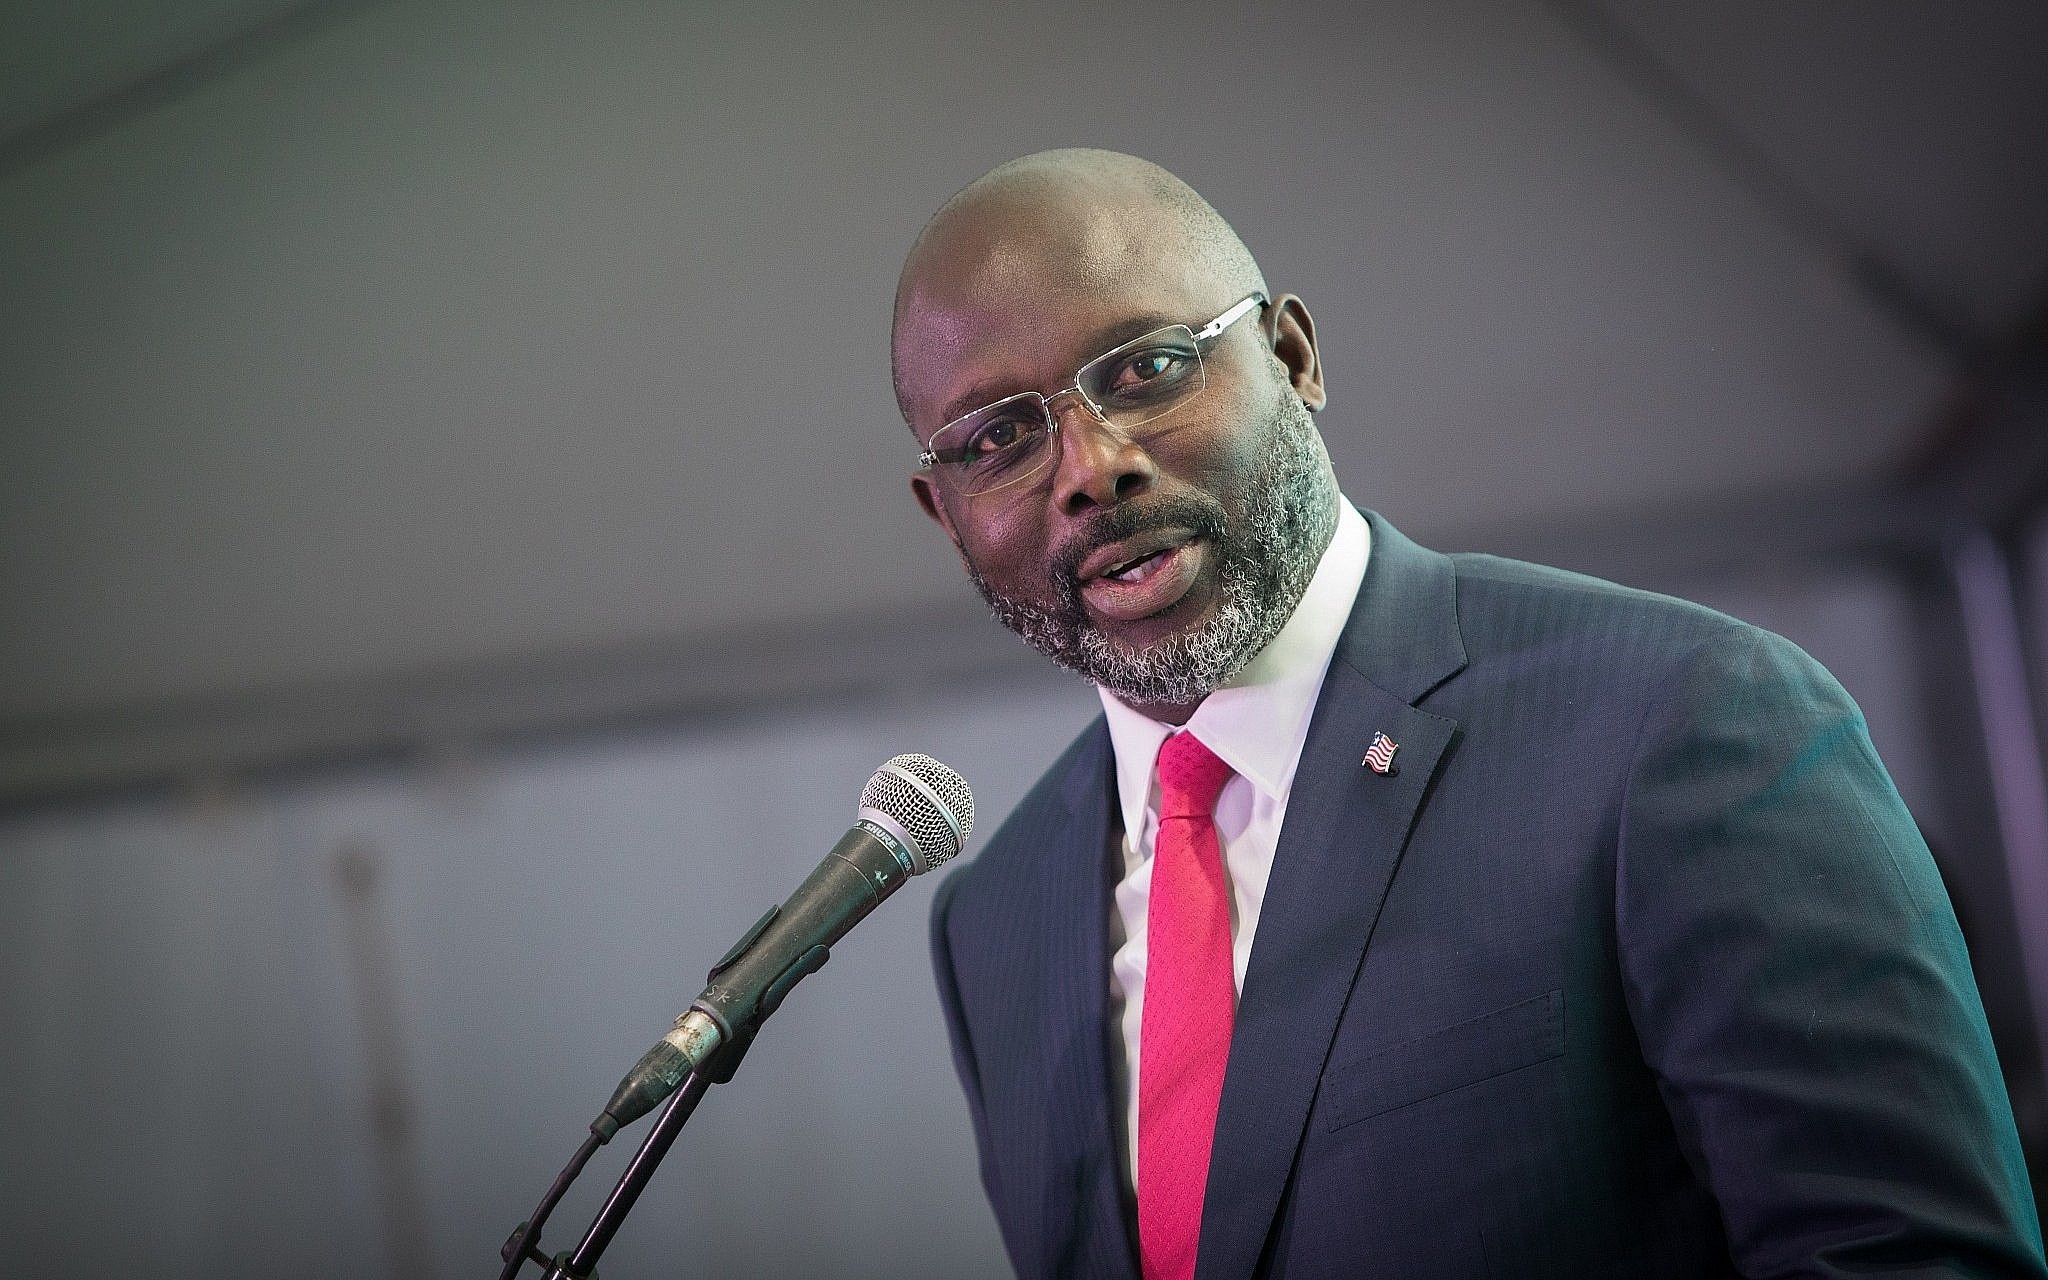 Liberia’s president George Weah loses re-election